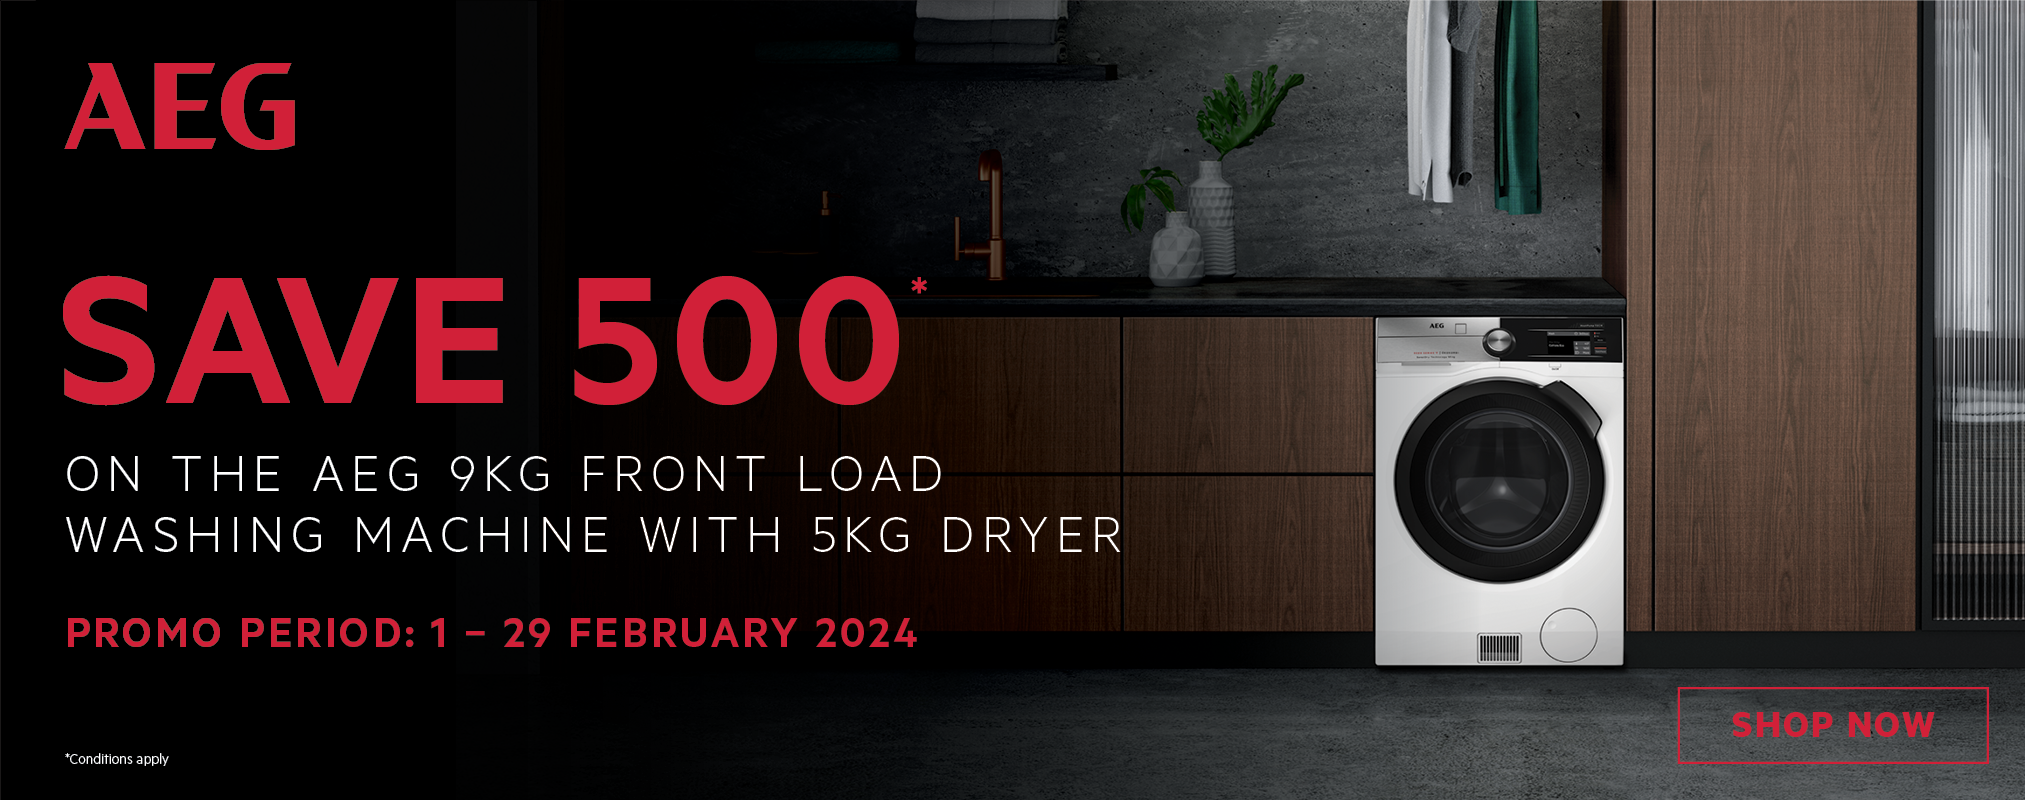 Save Up To $500* On The AEG 9kg Front Load Washing Machine With 5kg Dryer